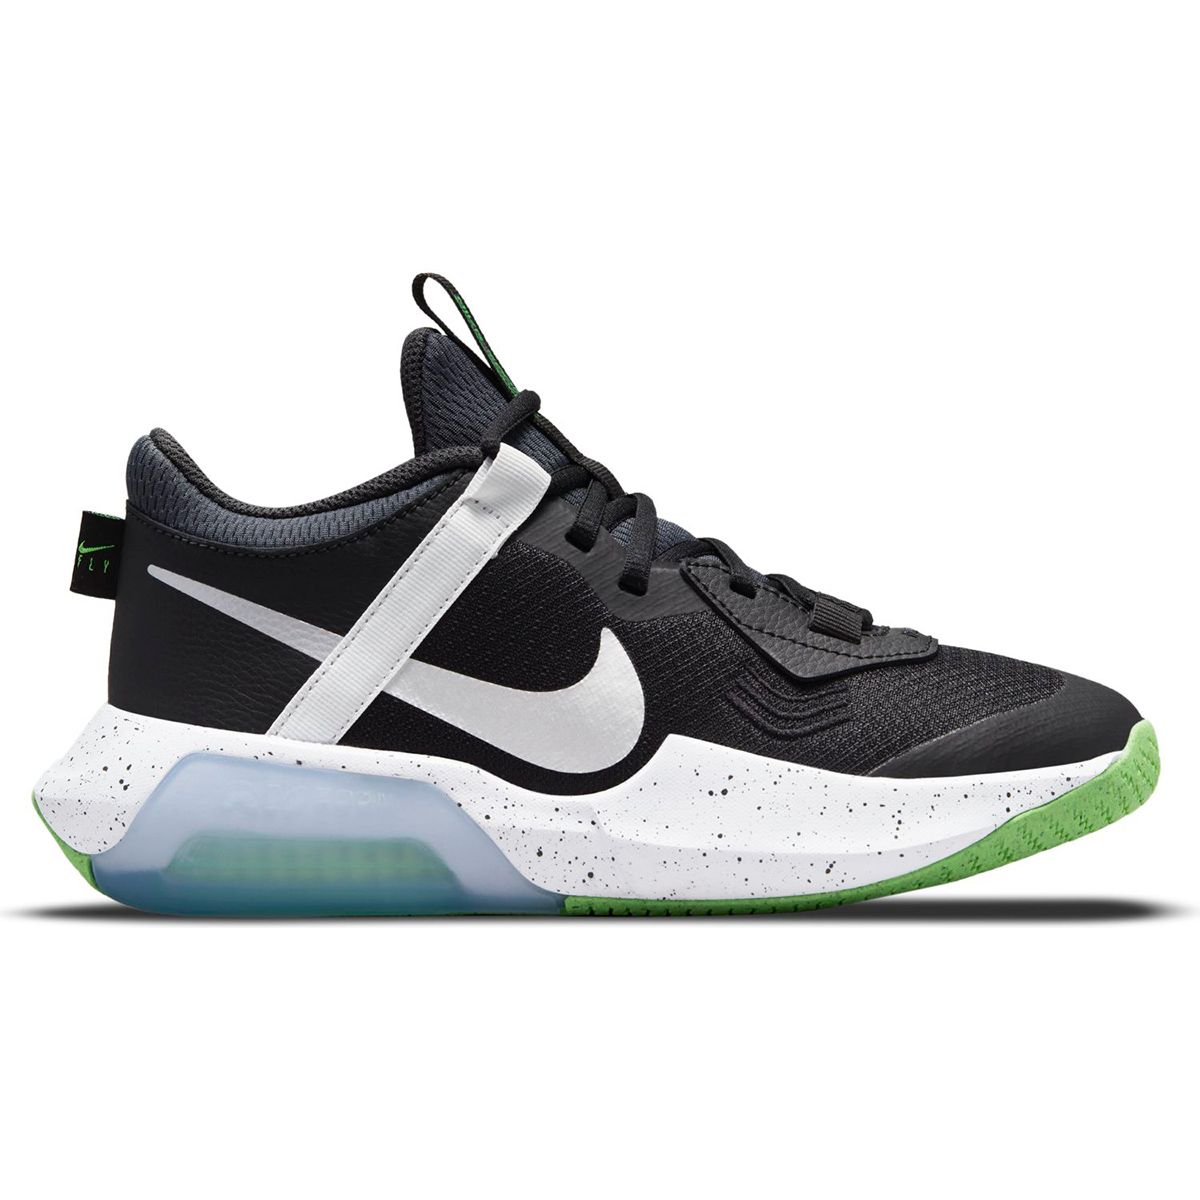 Big Kids' Nike Air Zoom Crossover Basketball Shoes